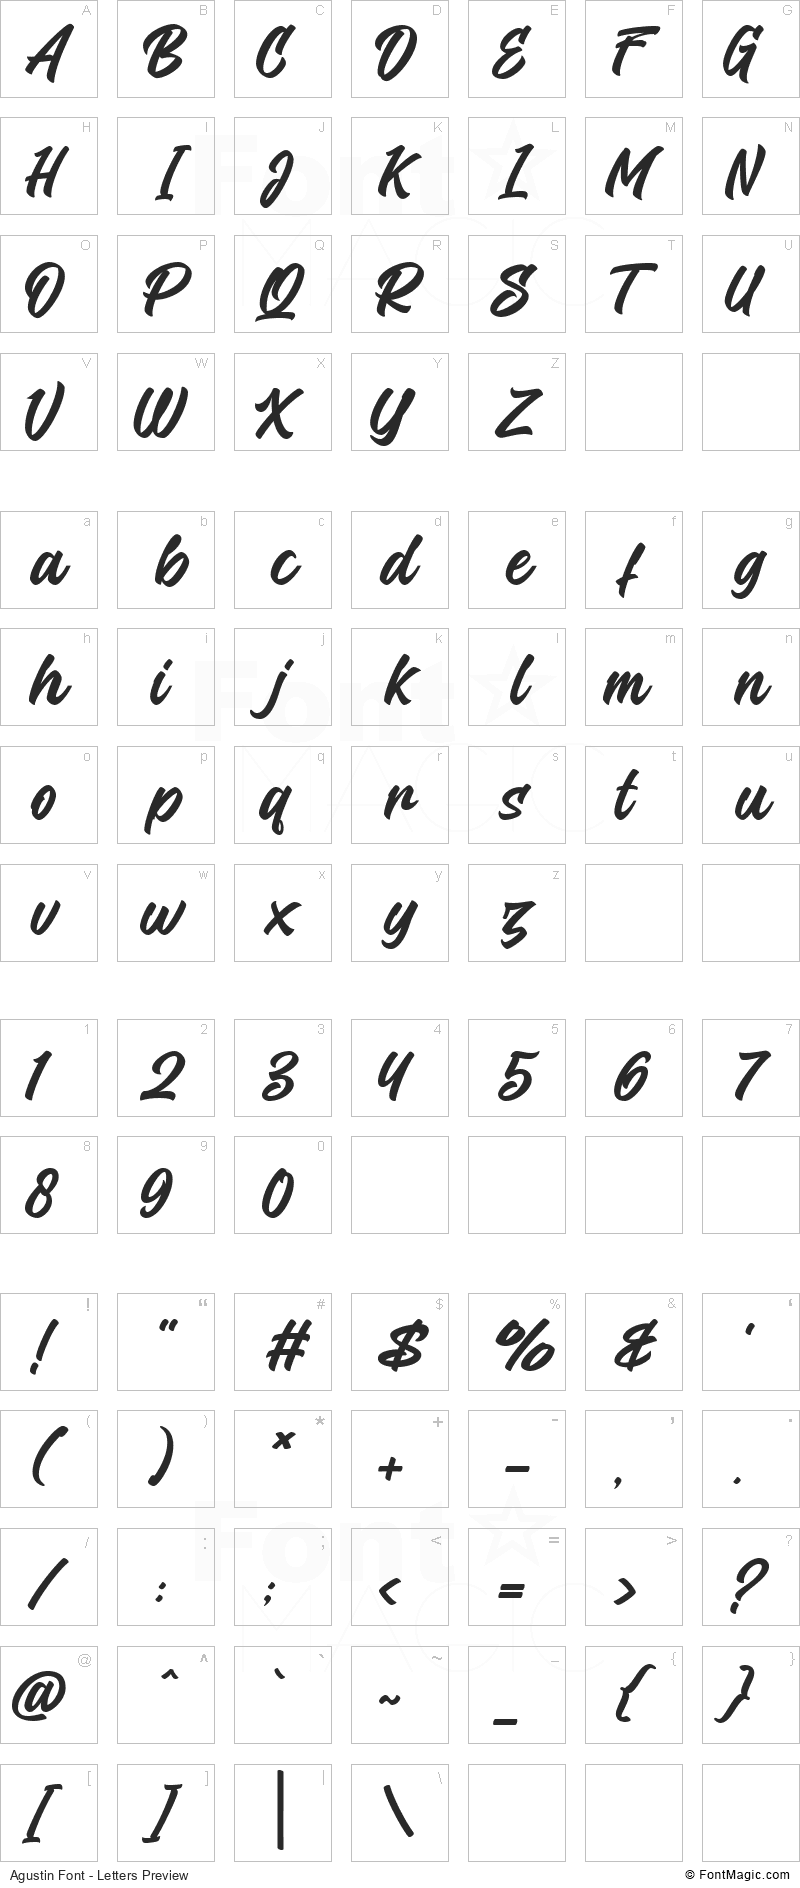 Agustin Font - All Latters Preview Chart